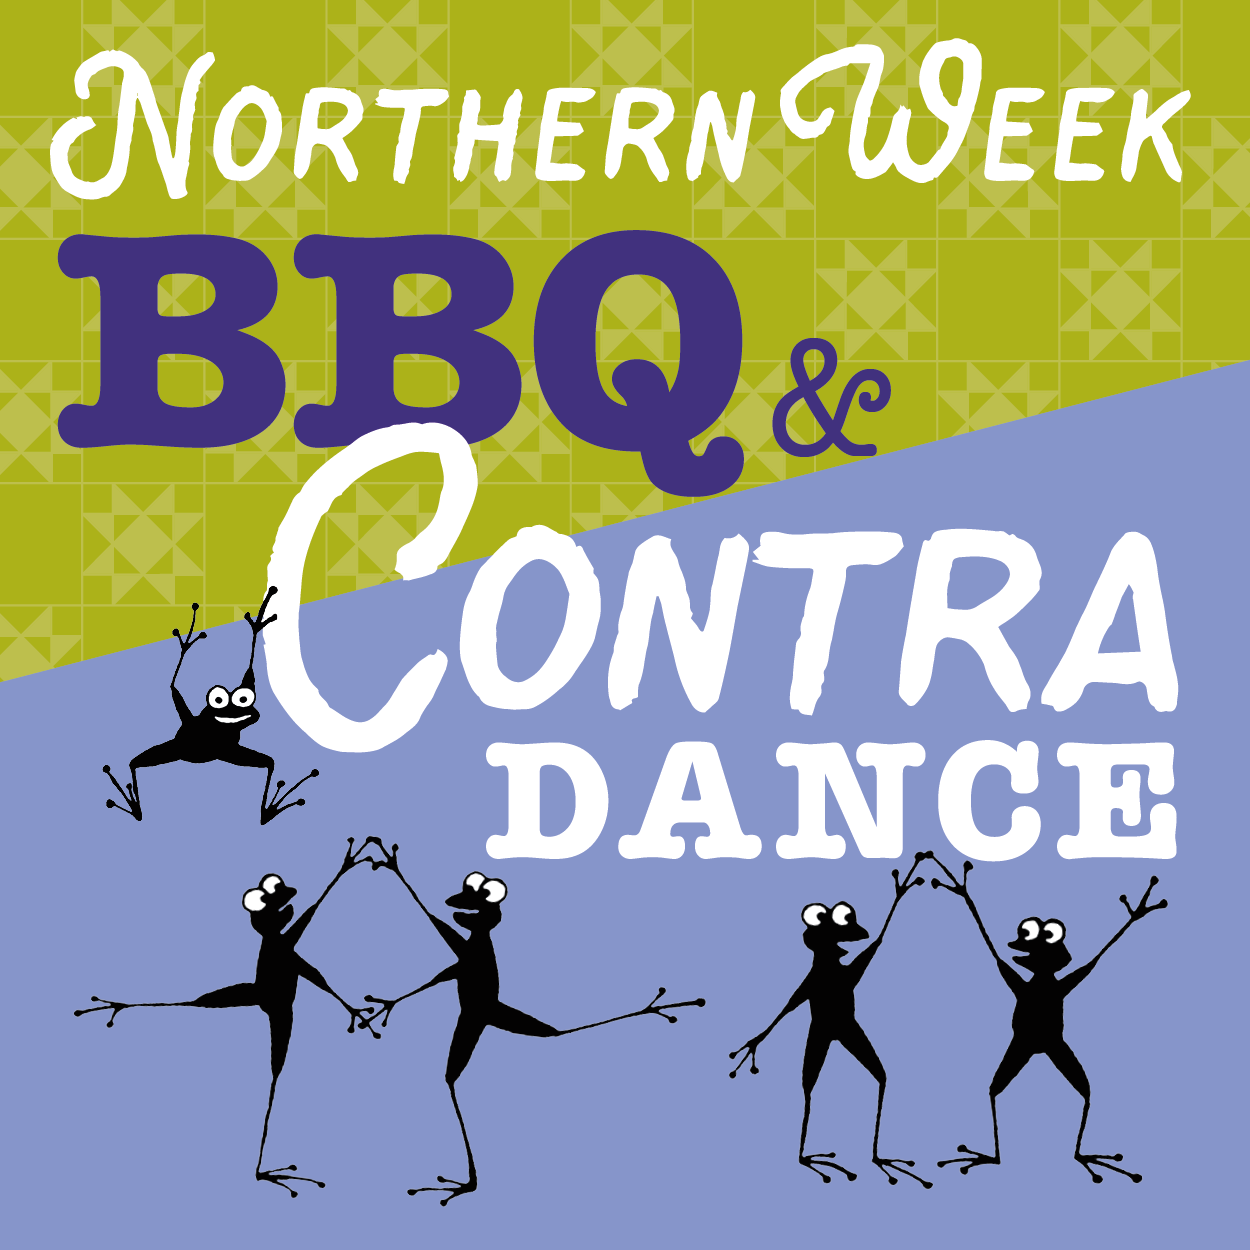 Northern week BBQ and Contra Dance poster